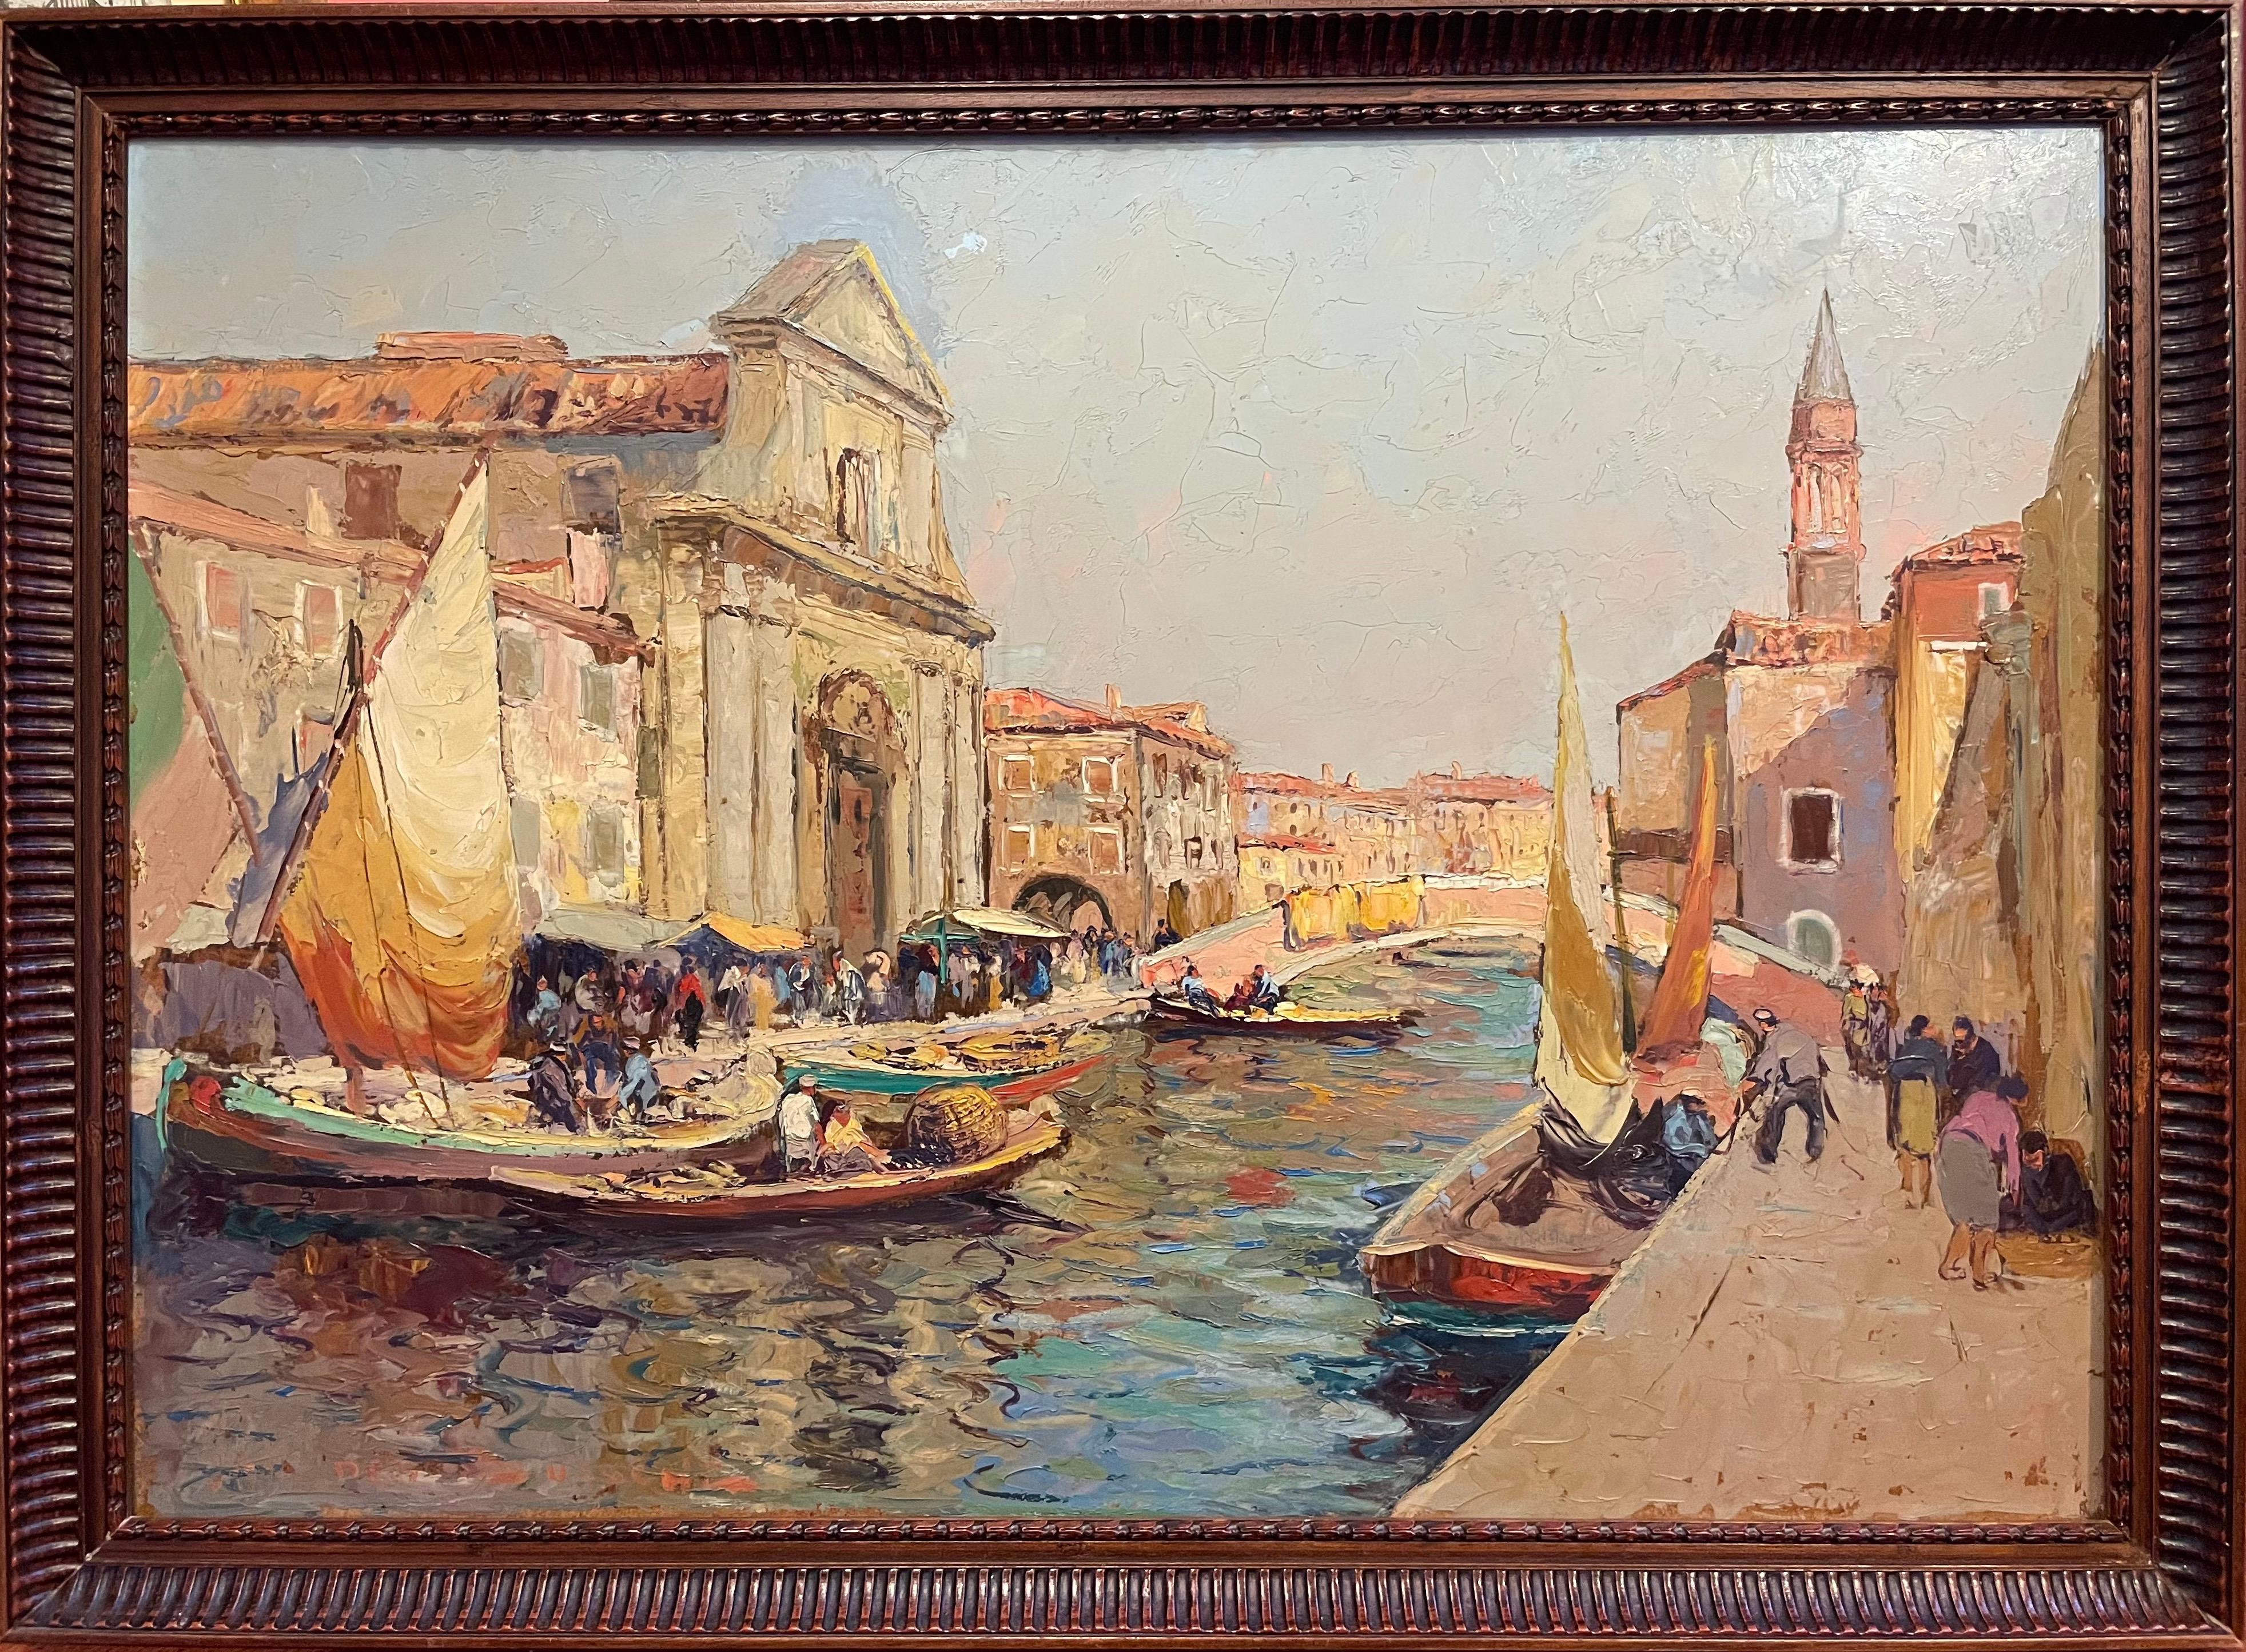 Italian signed Landscape Painting - Huge Oil Painting Venetian Backwater Fish Market Canal Scene Boats & Figures